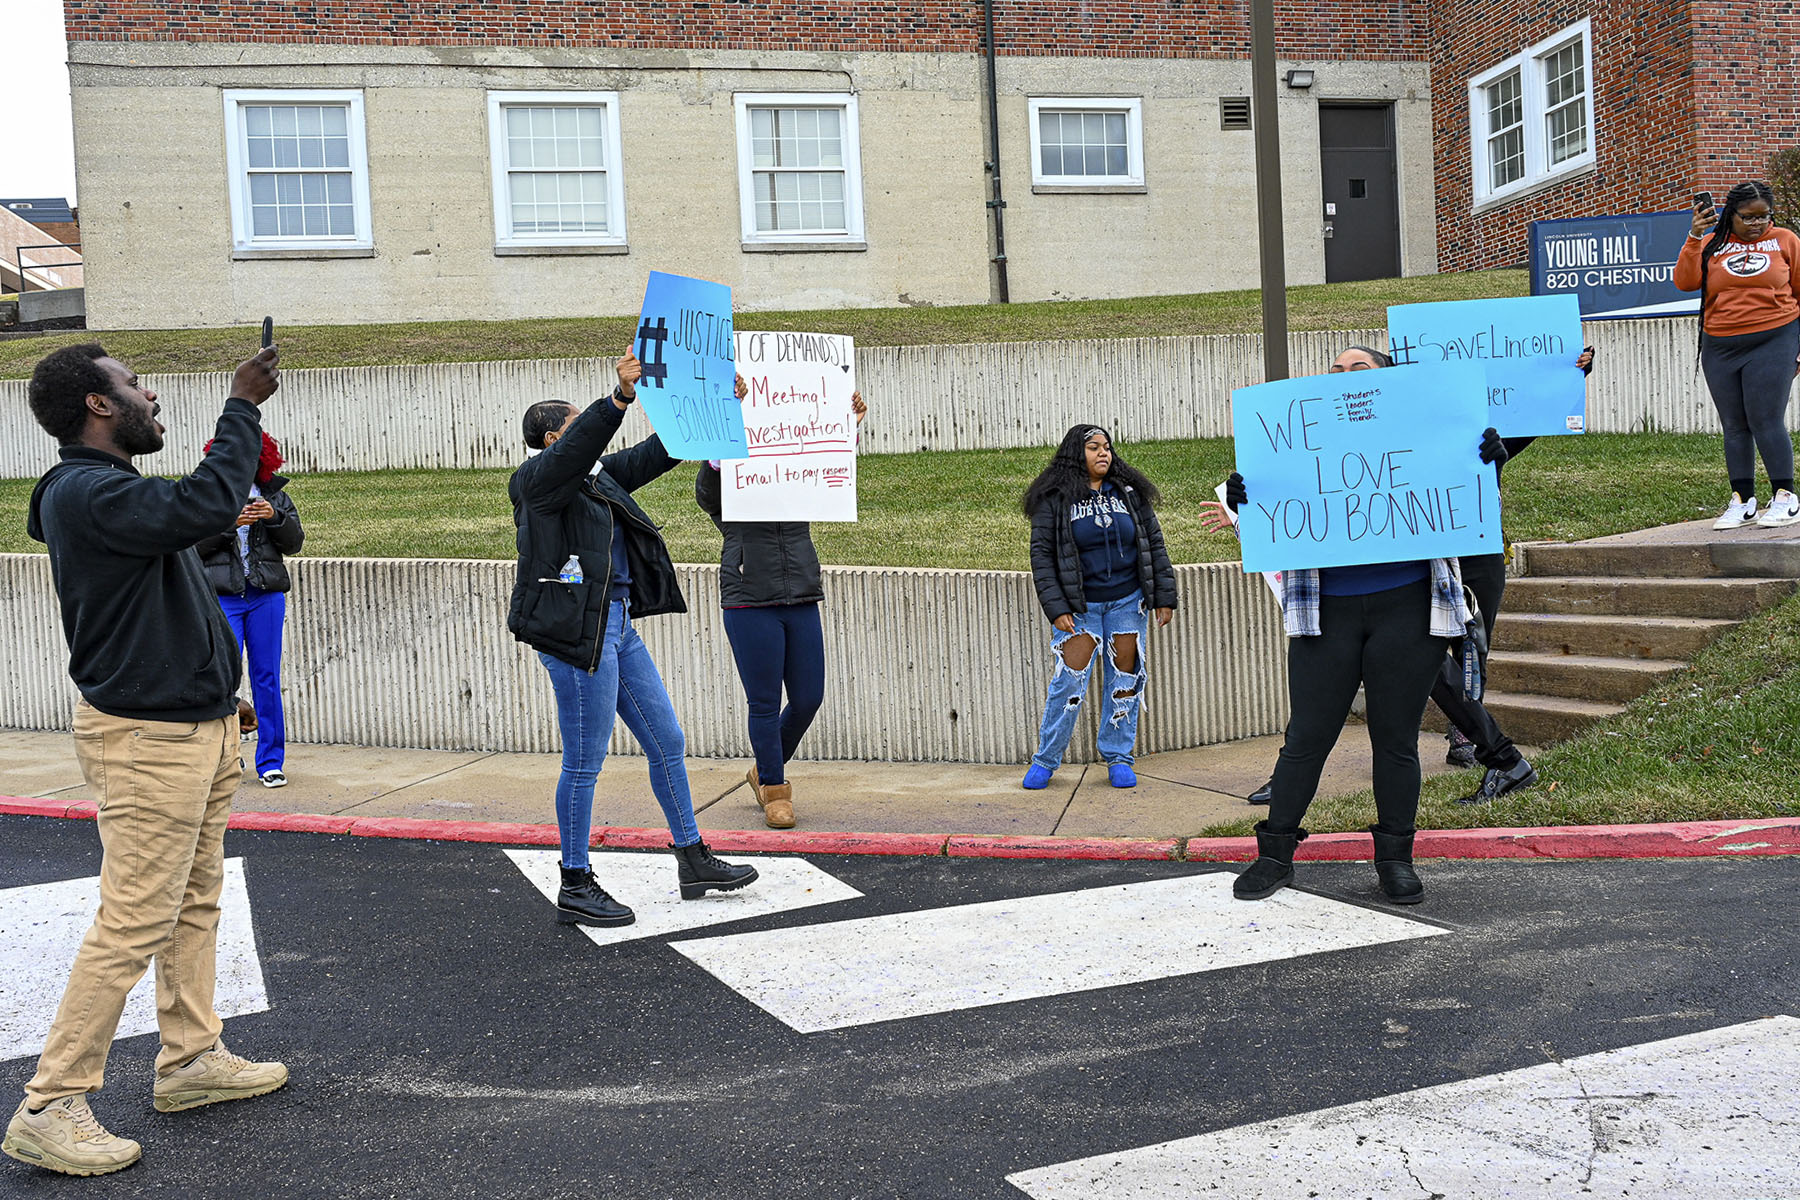 Lincoln University students protest outside the administration building calling for the removal of Lincoln University President John Moseley.